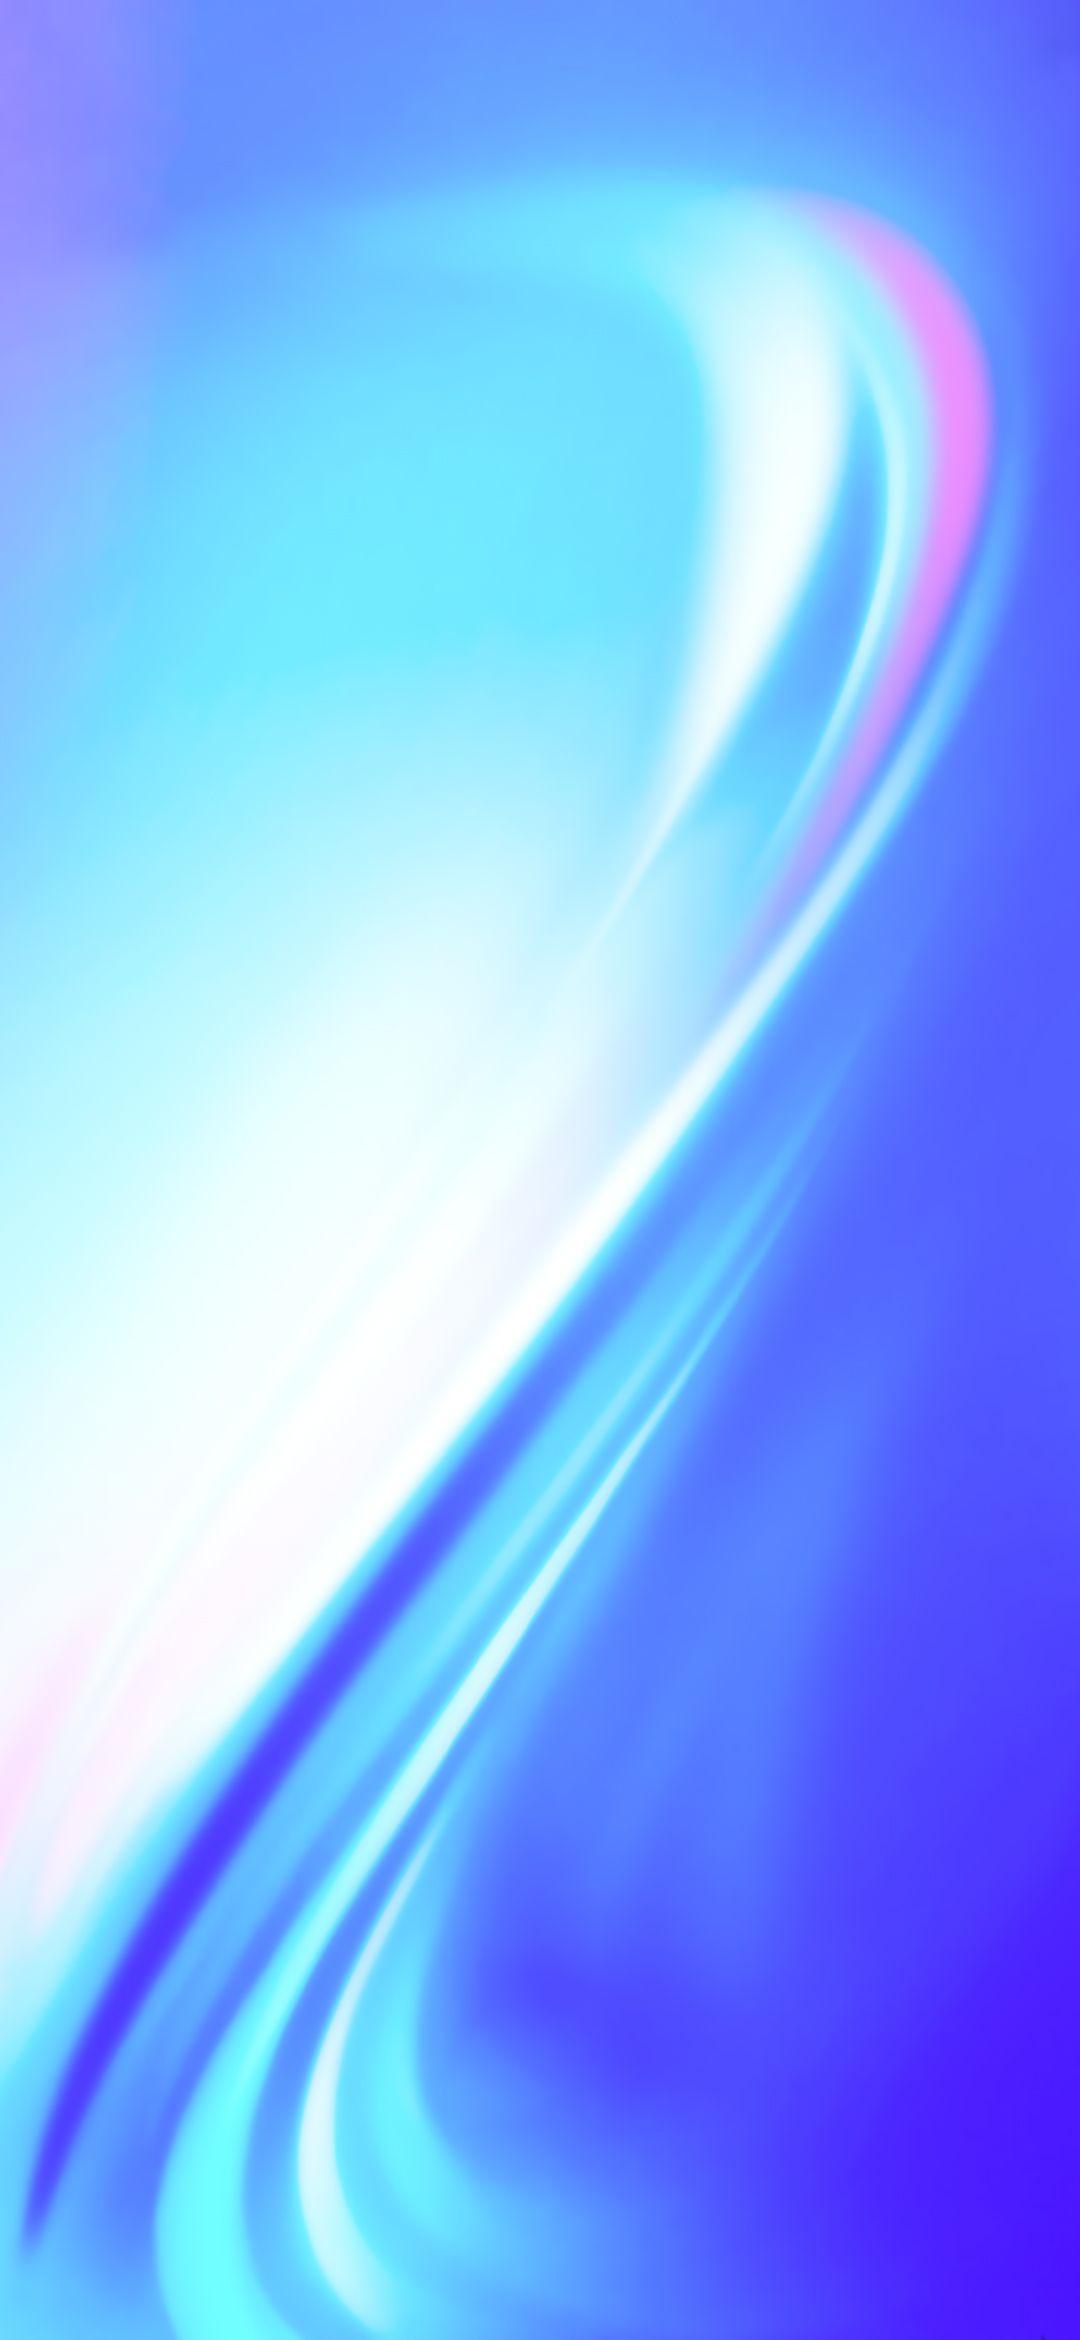 Download Vivo S1 Pro Official Wallpaper Here! Full HD